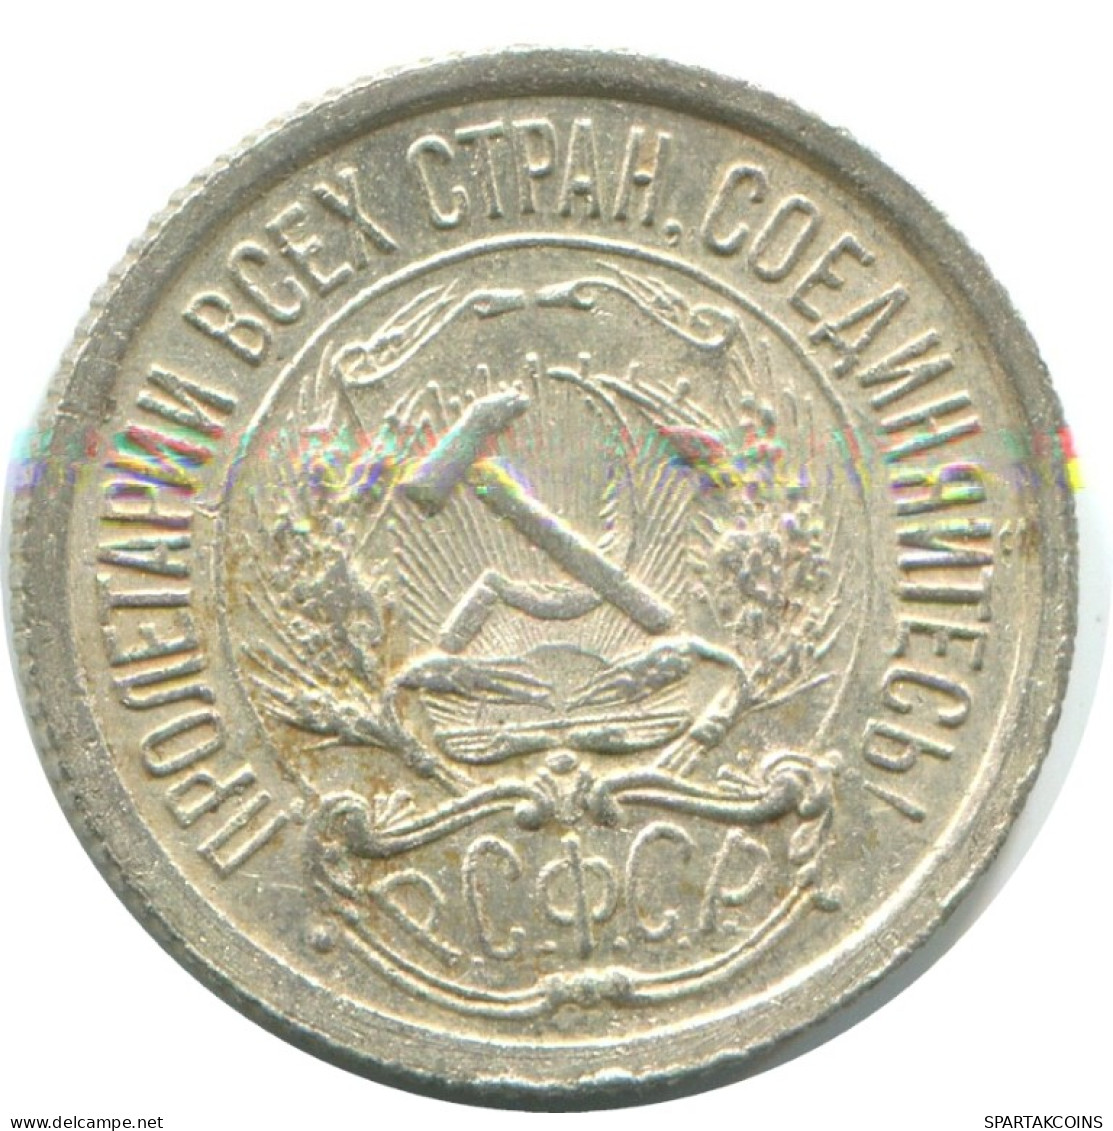 10 KOPEKS 1923 RUSSIE RUSSIA RSFSR ARGENT Pièce HIGH GRADE #AE984.4.F.A - Rusia